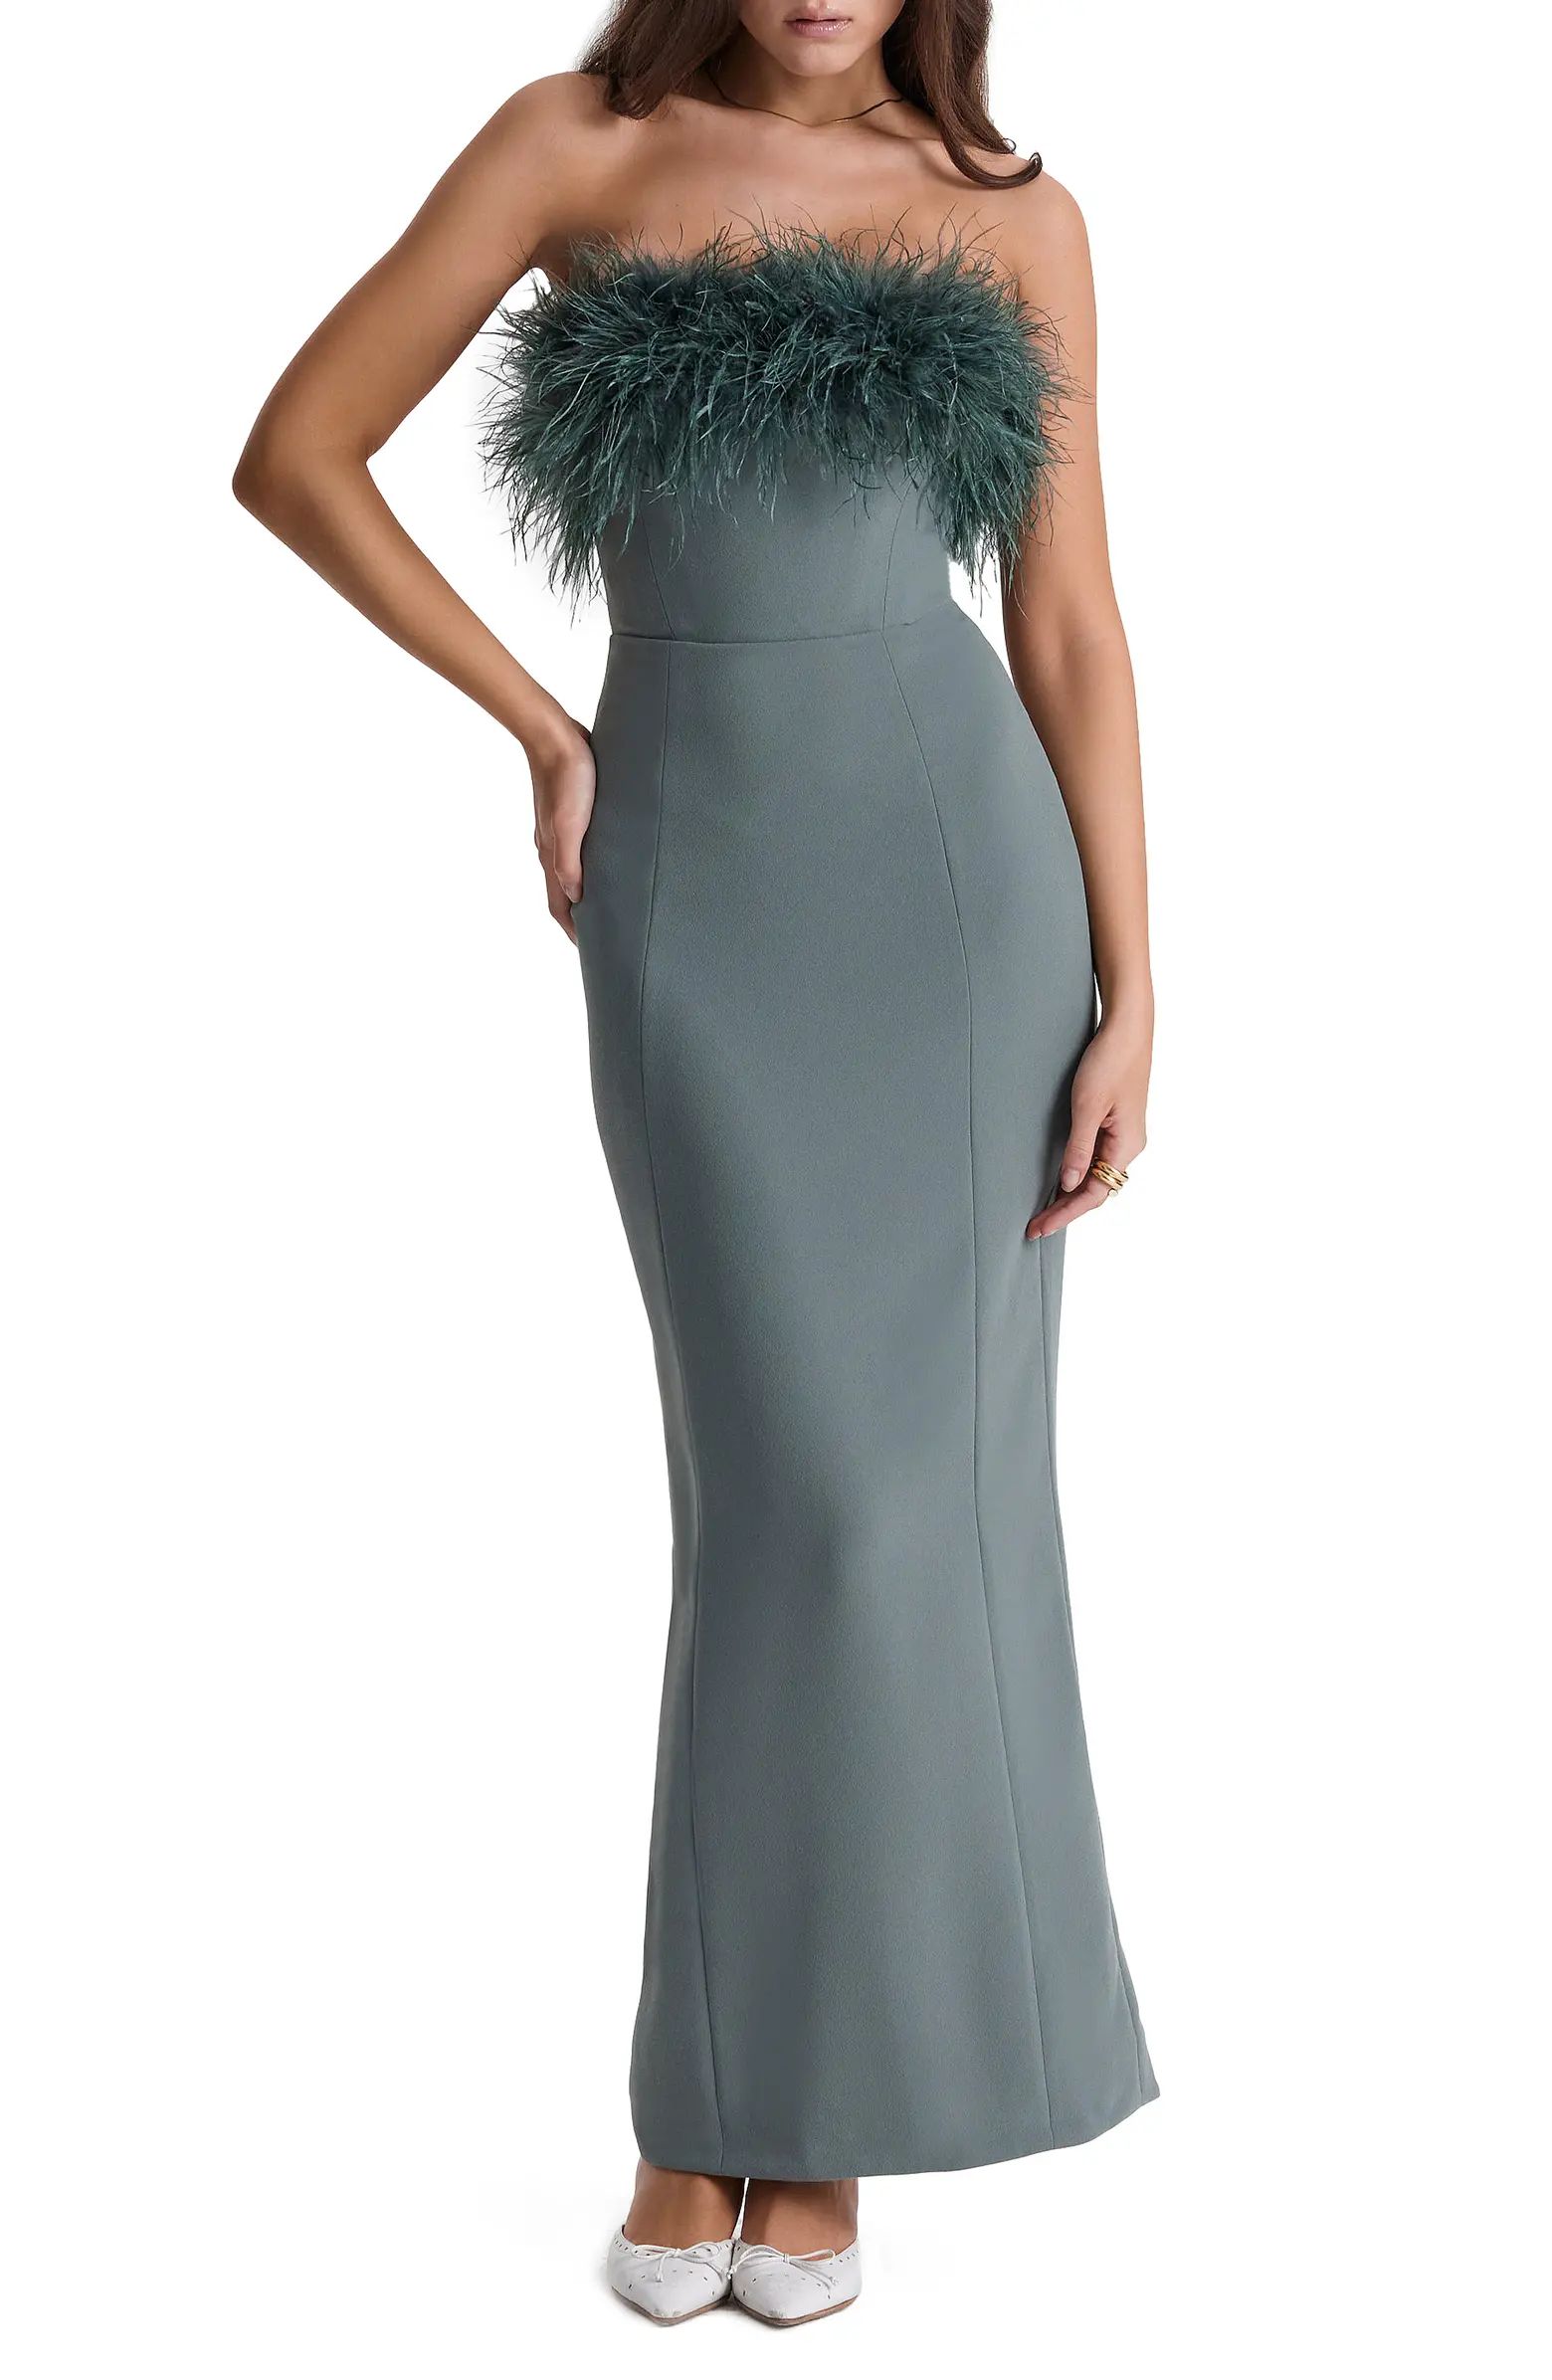 Juliene Strapless Feather Bodice Crepe Cocktail Dress | Nordstrom